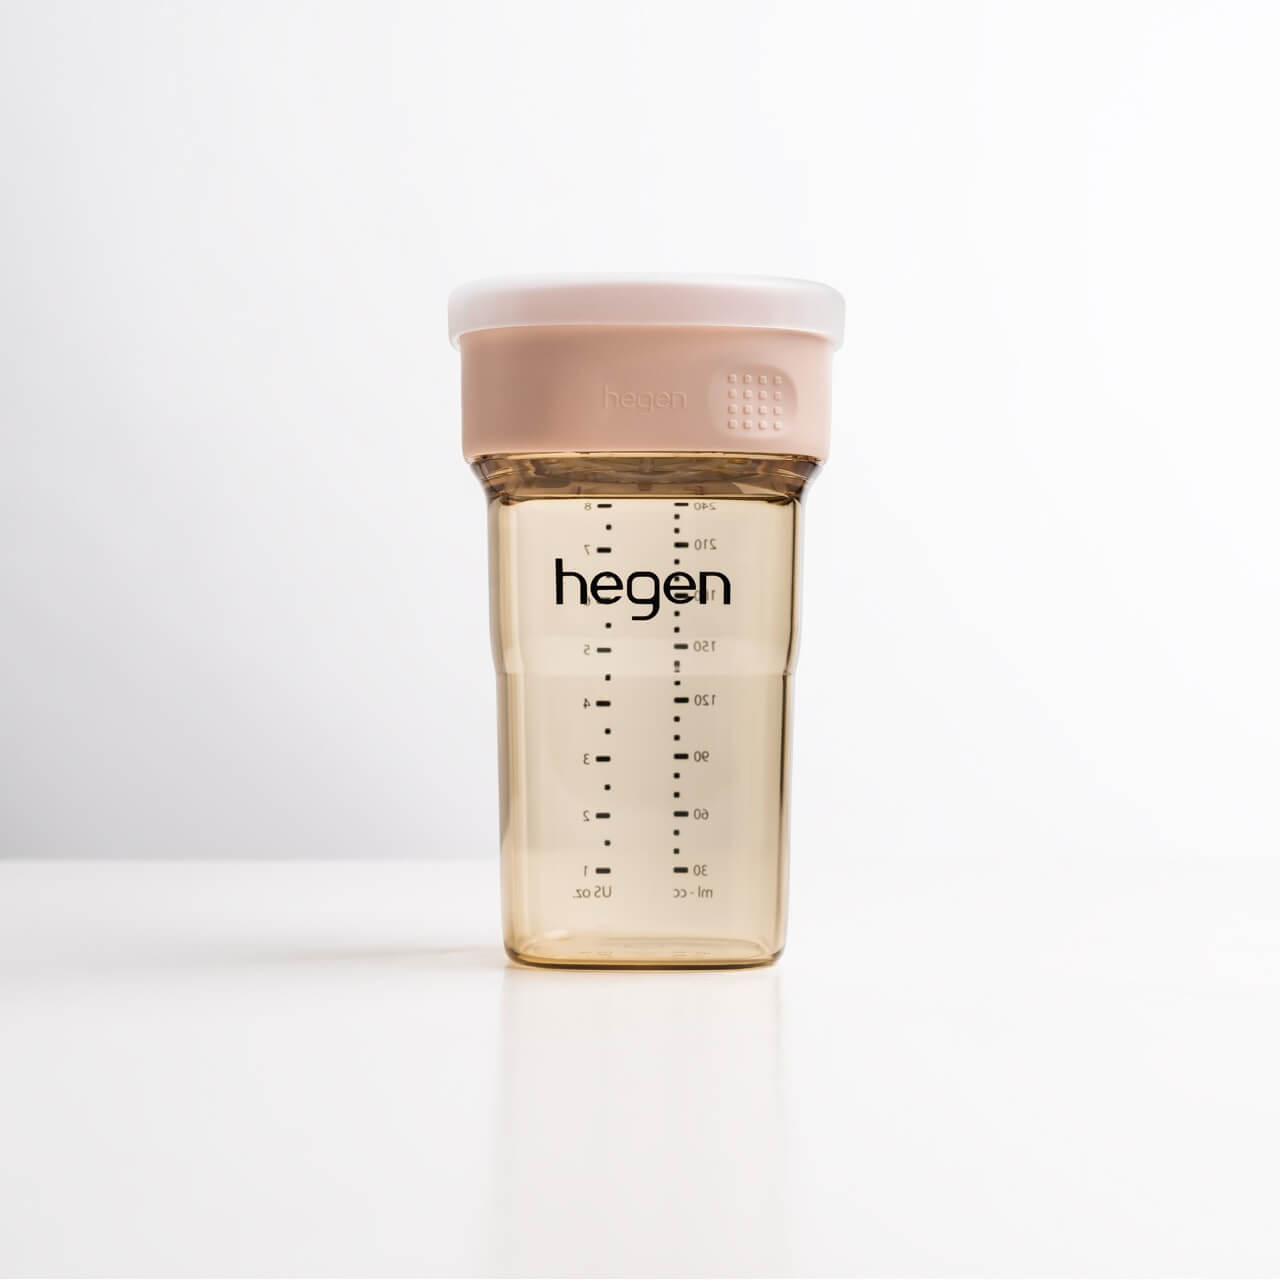 Hegen PCTO™ All-Rounder Cup PPSU is designed to support your little one in learning the skills and coordination they need for this important milestone while cultivating good drinking habits from the beginning.